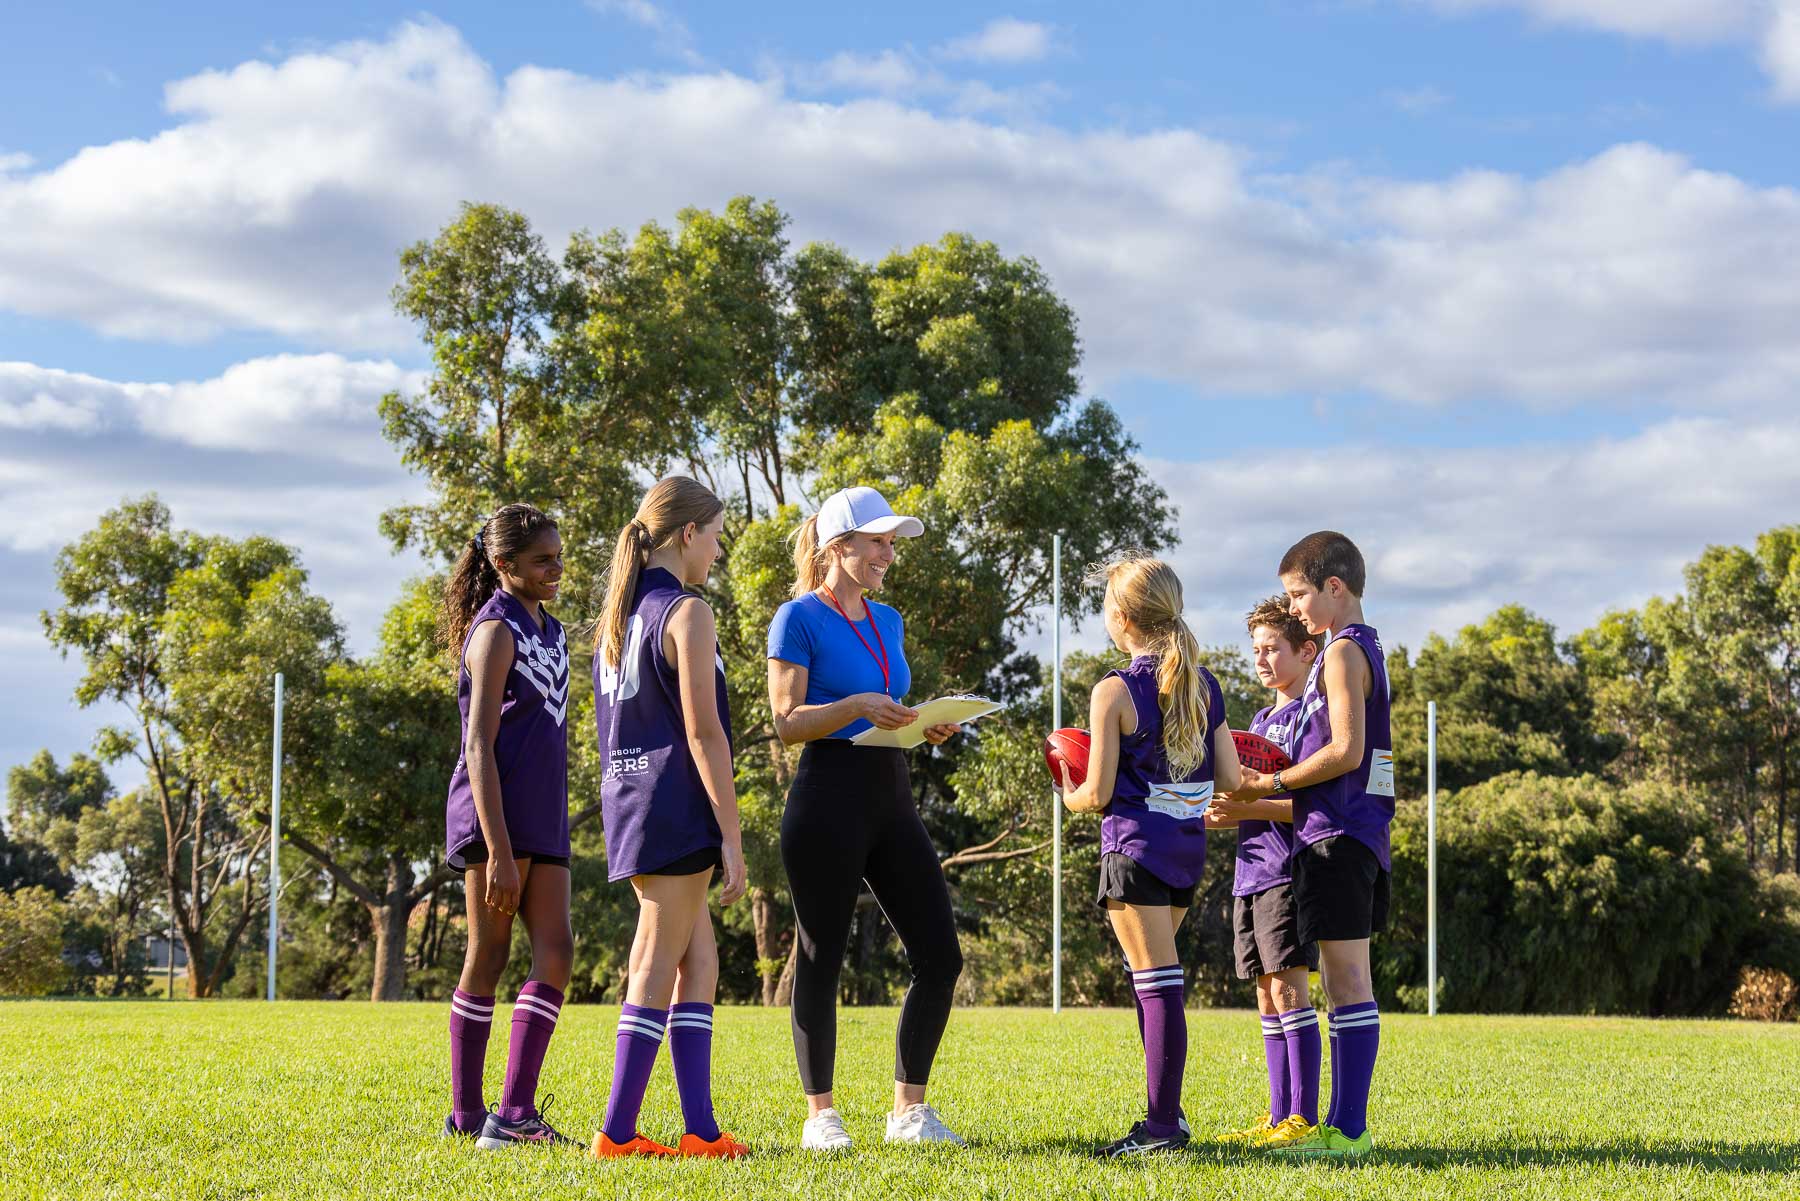 a coach addressing some kids from a football team standing in a group on football oval